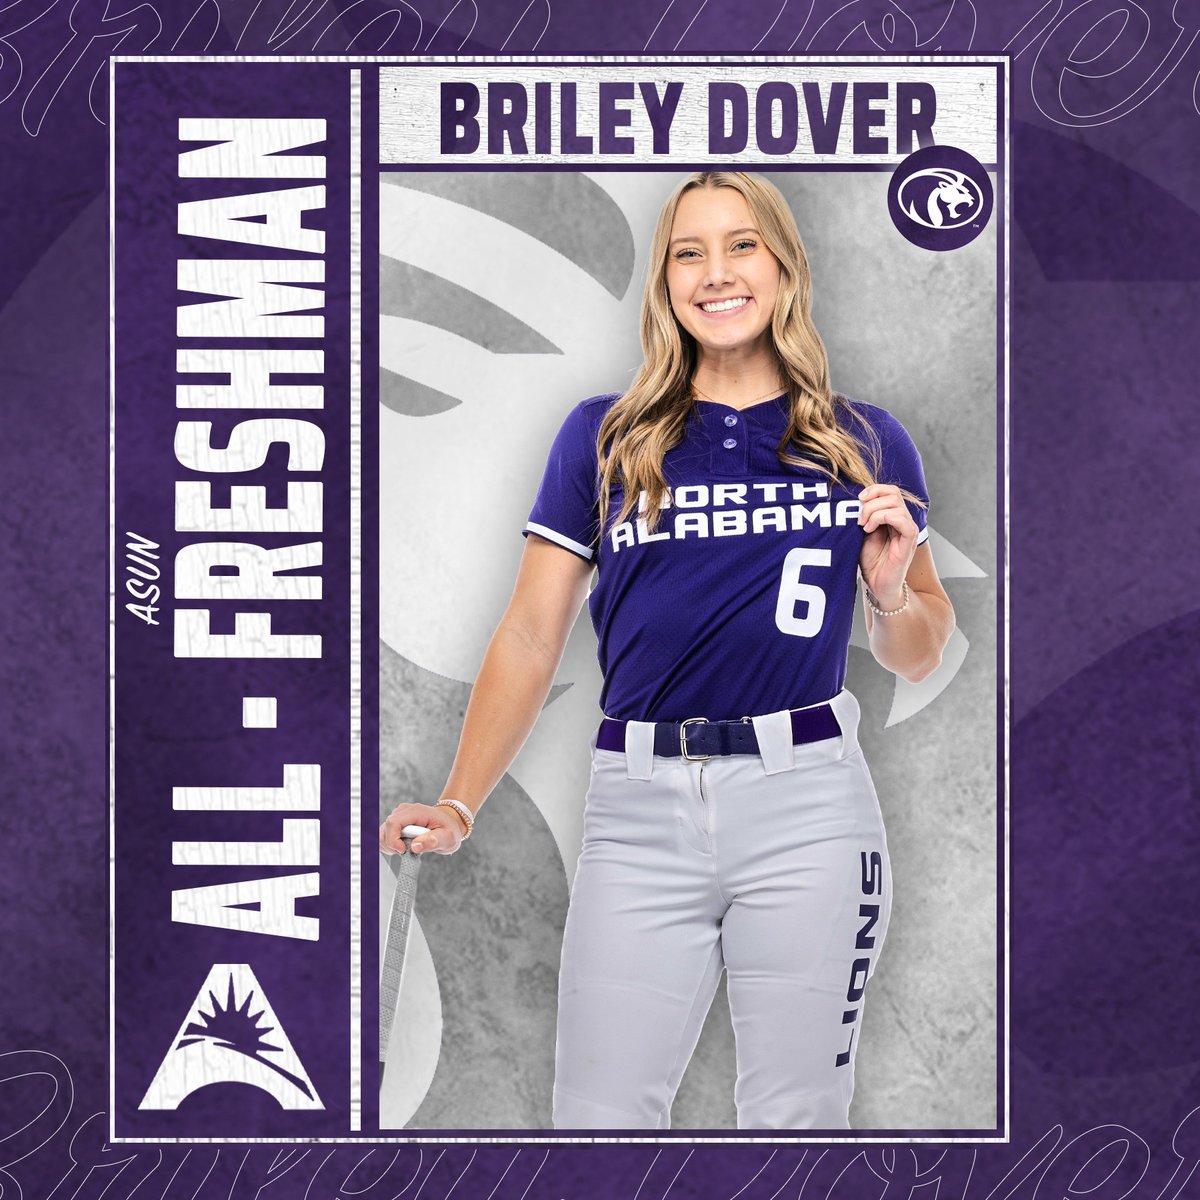 🏆 𝗔𝗦𝗨𝗡 𝗔𝗟𝗟-𝗙𝗥𝗘𝗦𝗛𝗠𝗔𝗡 🏆 Rounding out our all-conference awards is Briley Dover, who was unanimously selected to the all-freshman team! #RaiseTheROAR | #RoarLions 🦁